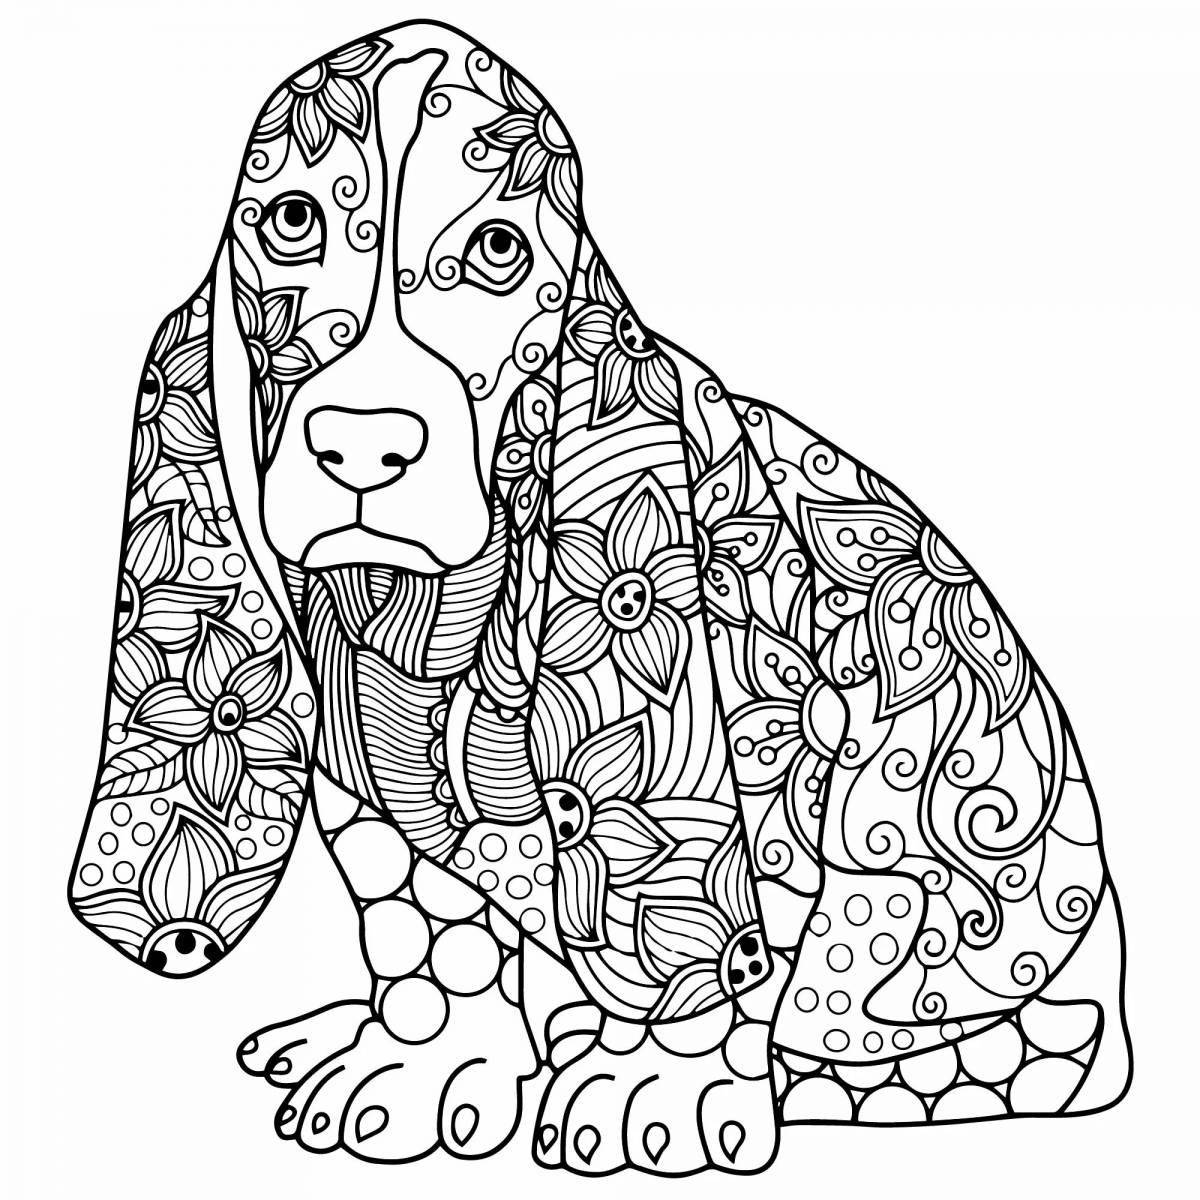 Creative anti-stress coloring book for kids